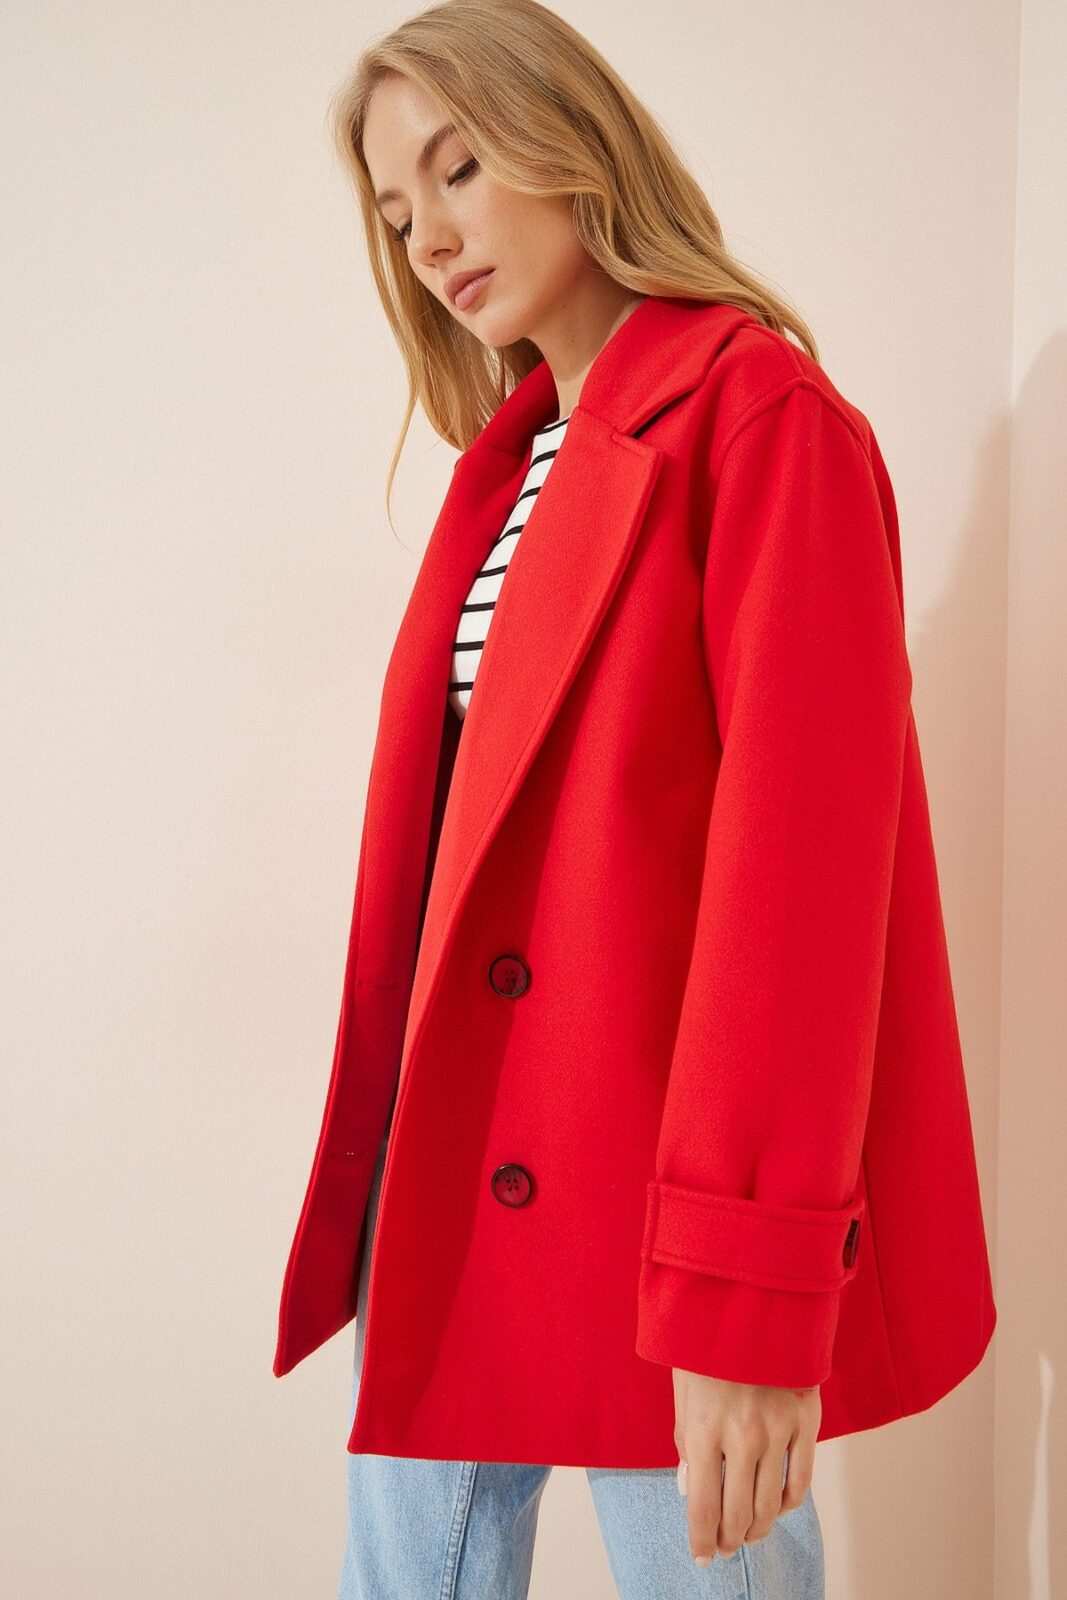 Happiness İstanbul Coat - Red